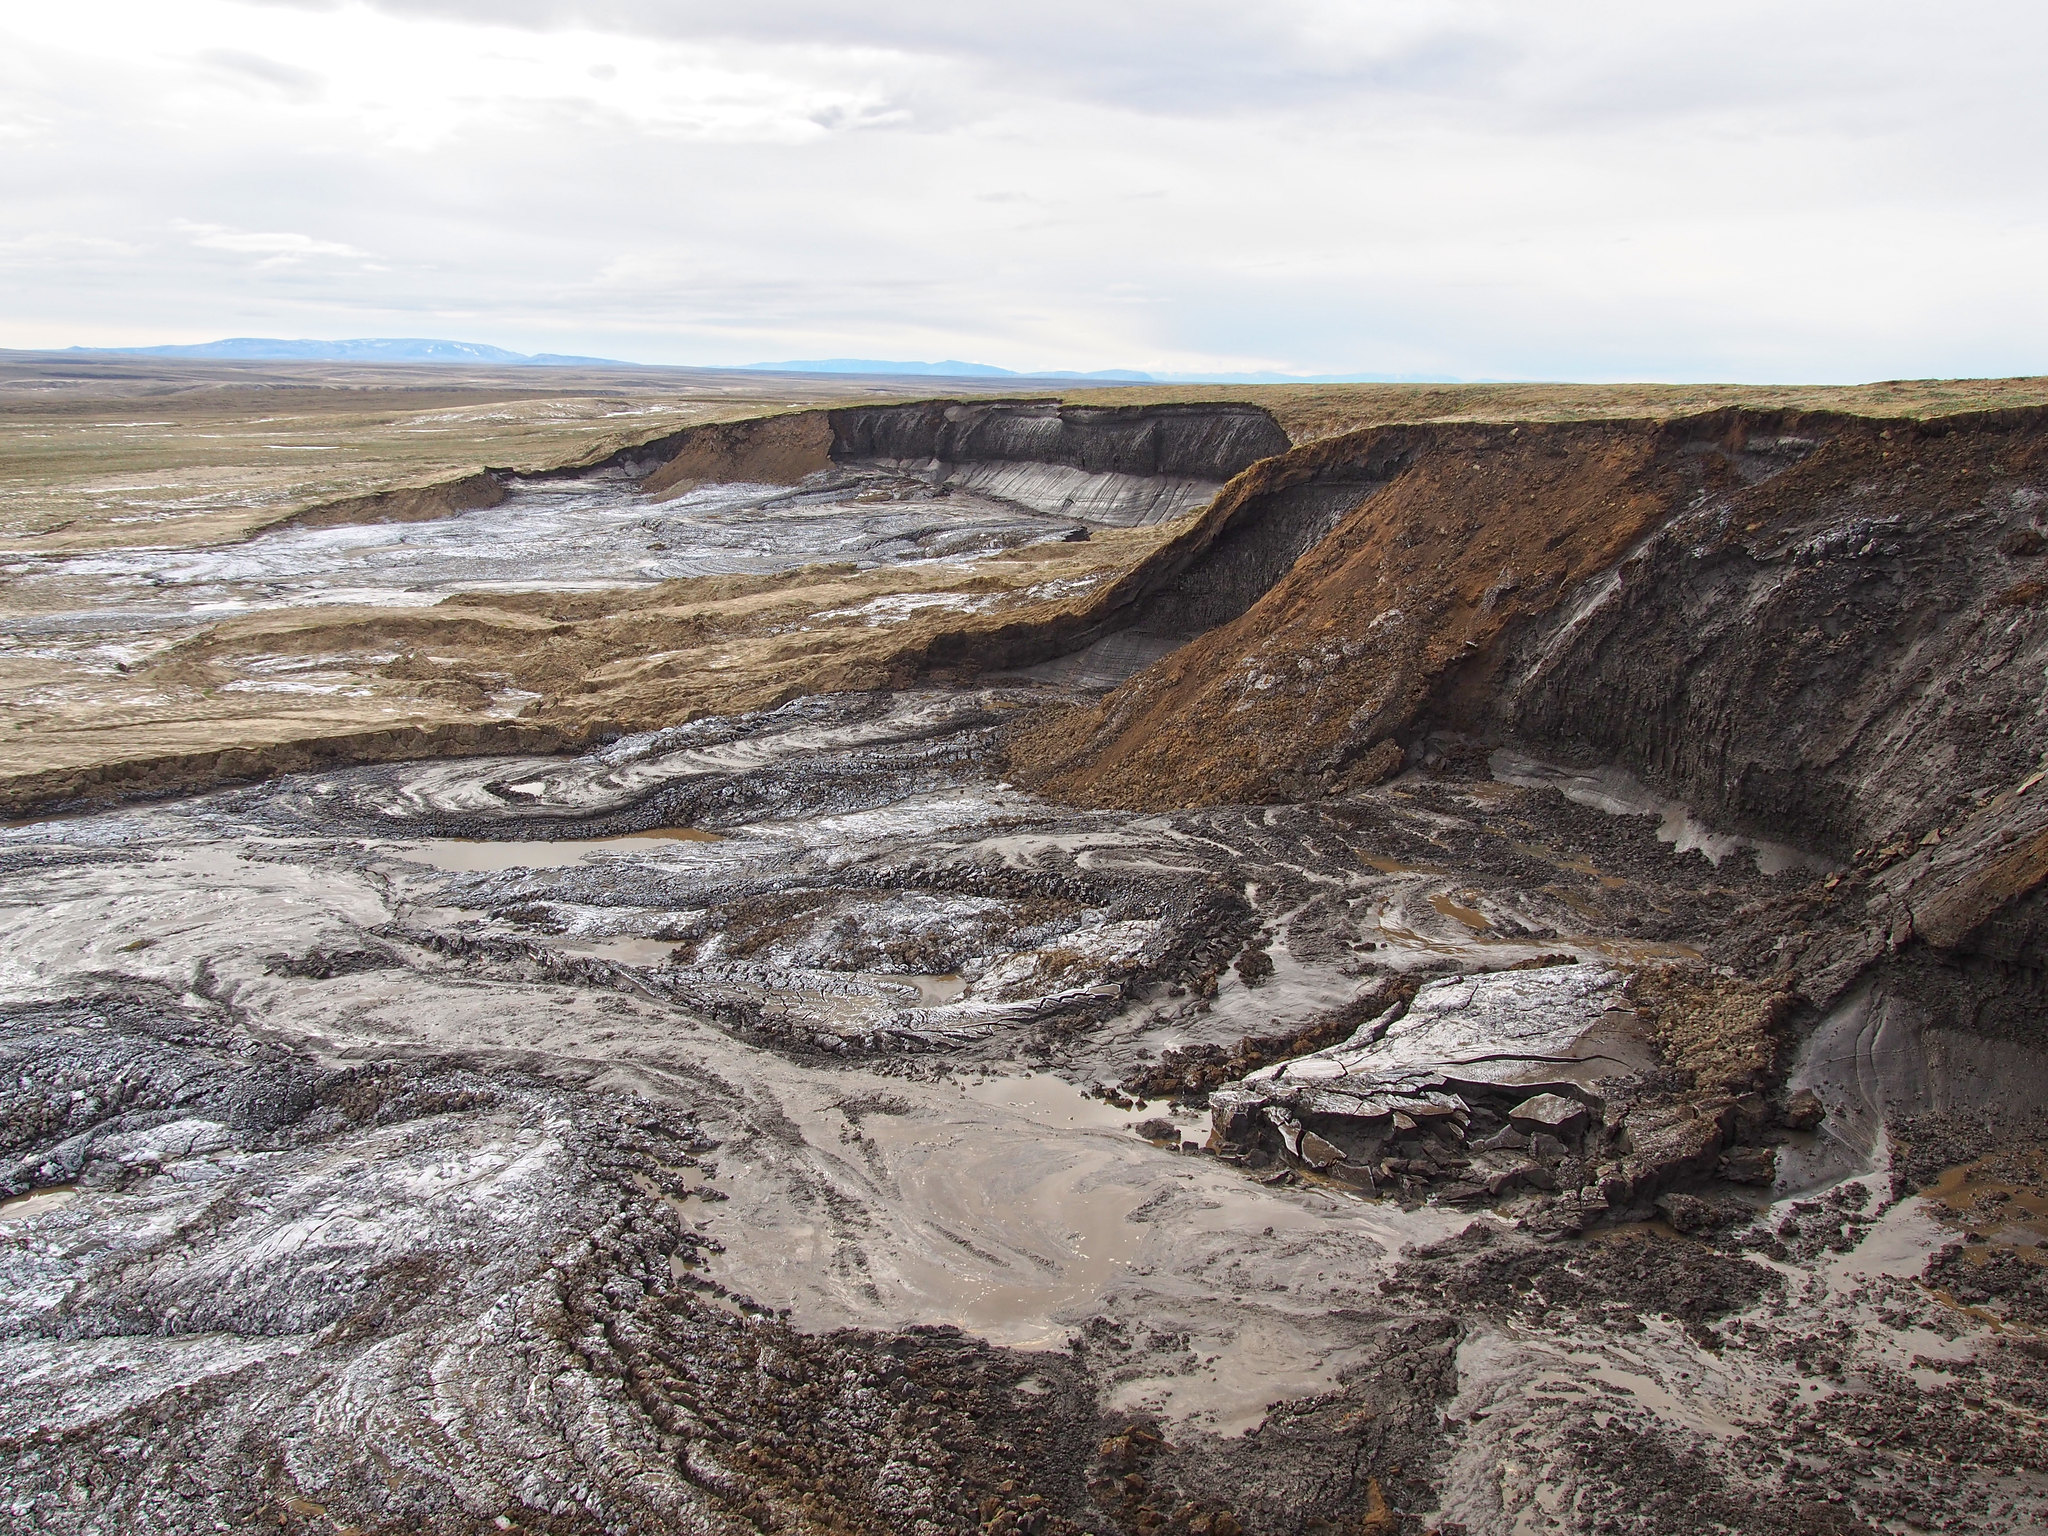 Permafrost thawing damages and disturbs soil